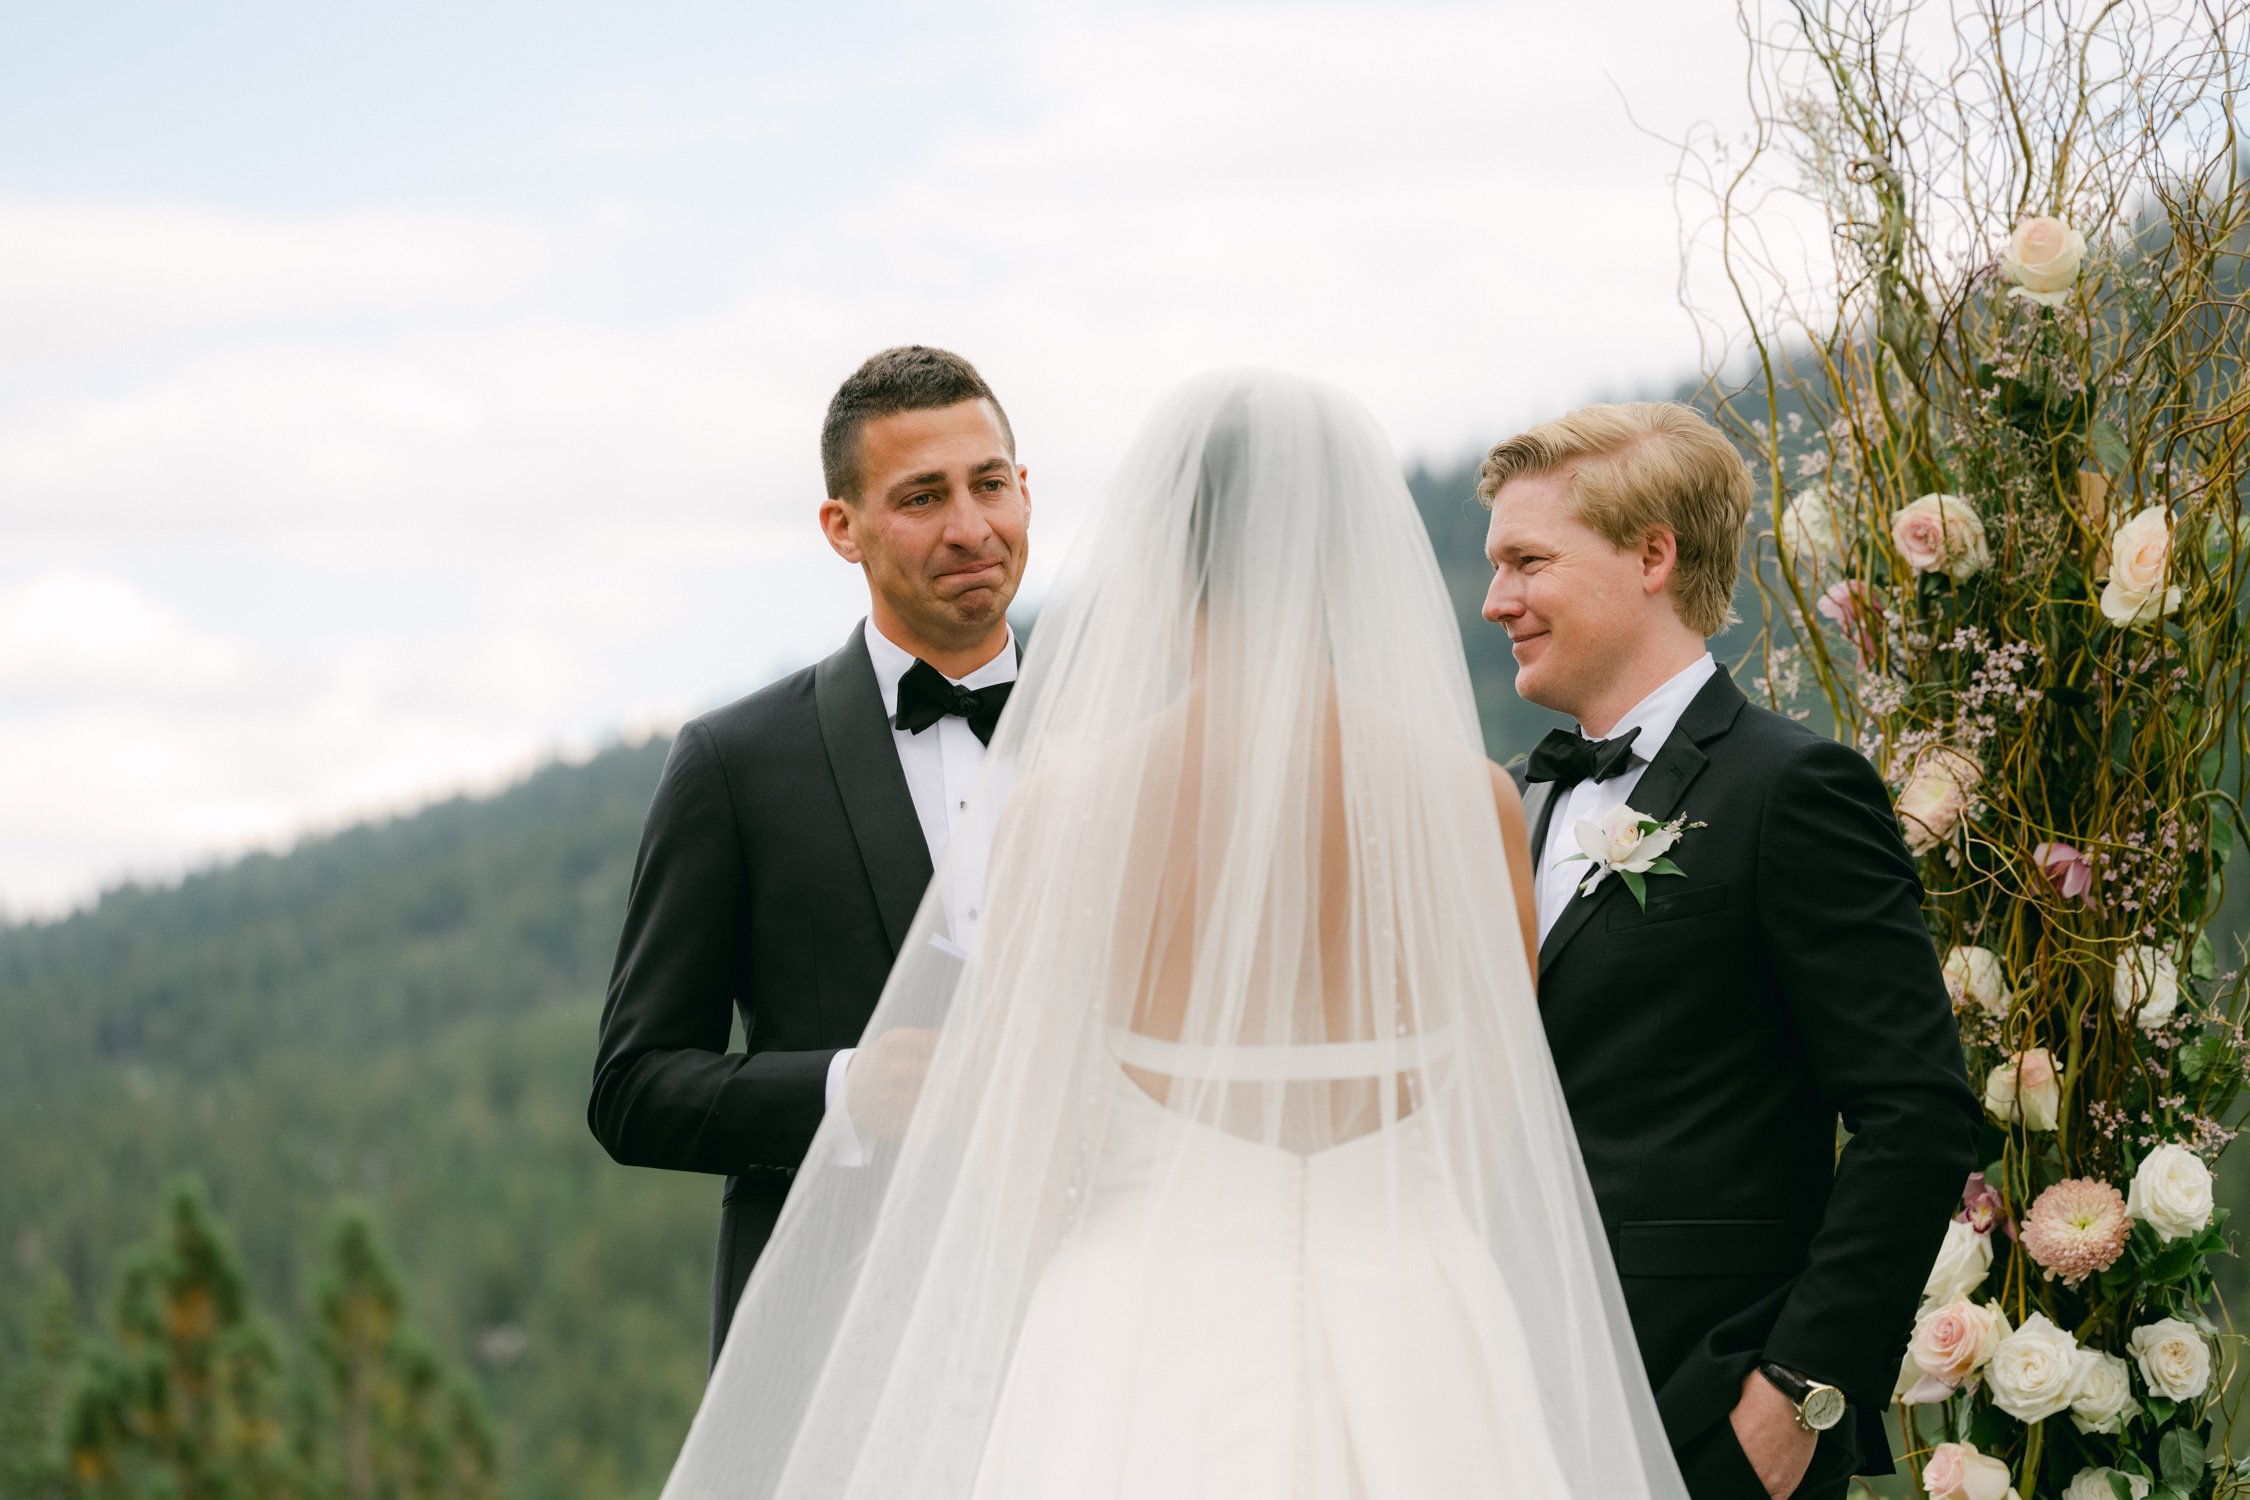 Martis Camp Wedding, photo of the couple sharing their wedding vows